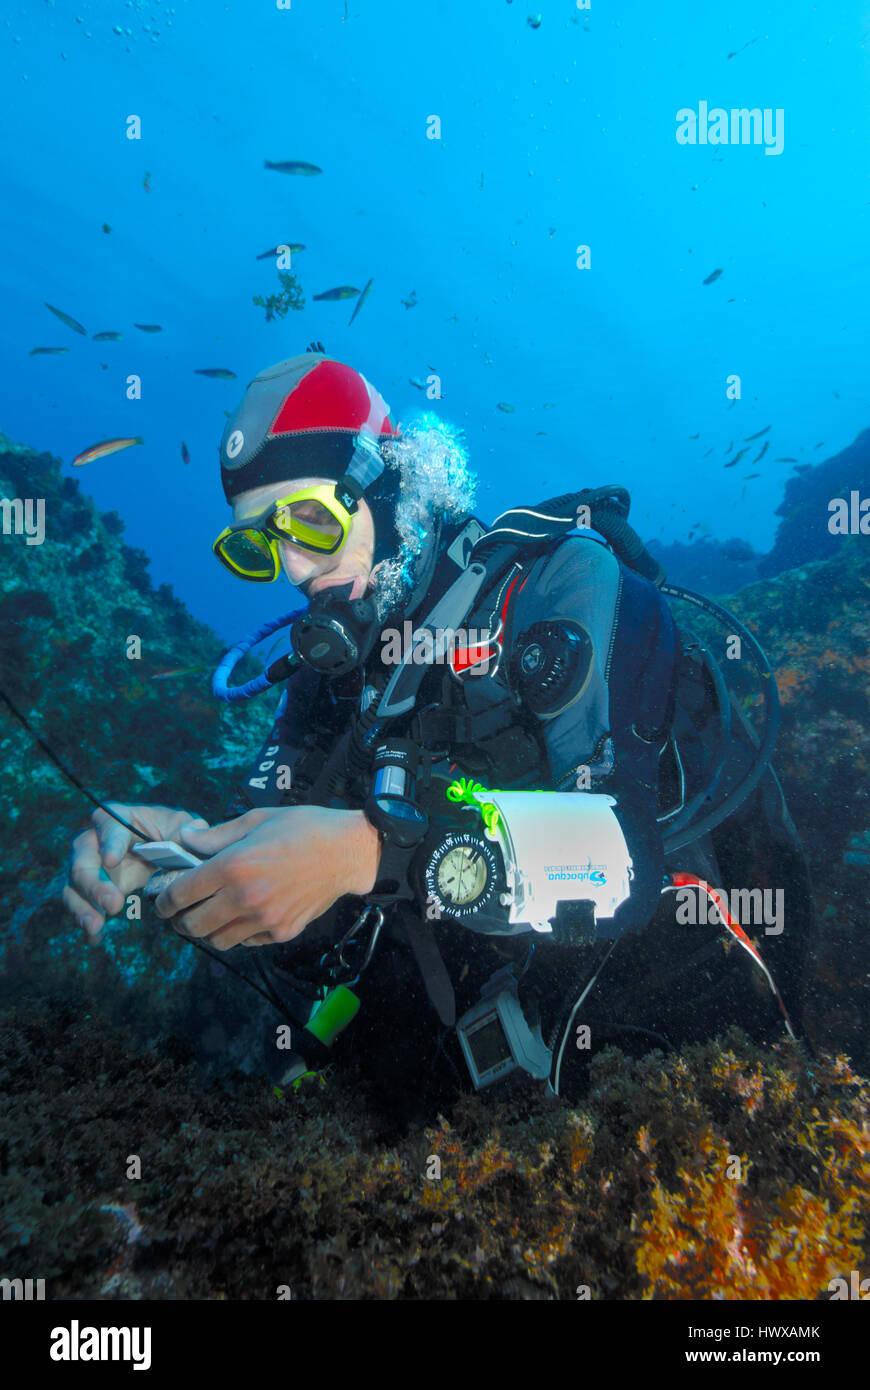 Scuba diver underwater looking at equipment on seabed Stock Photo